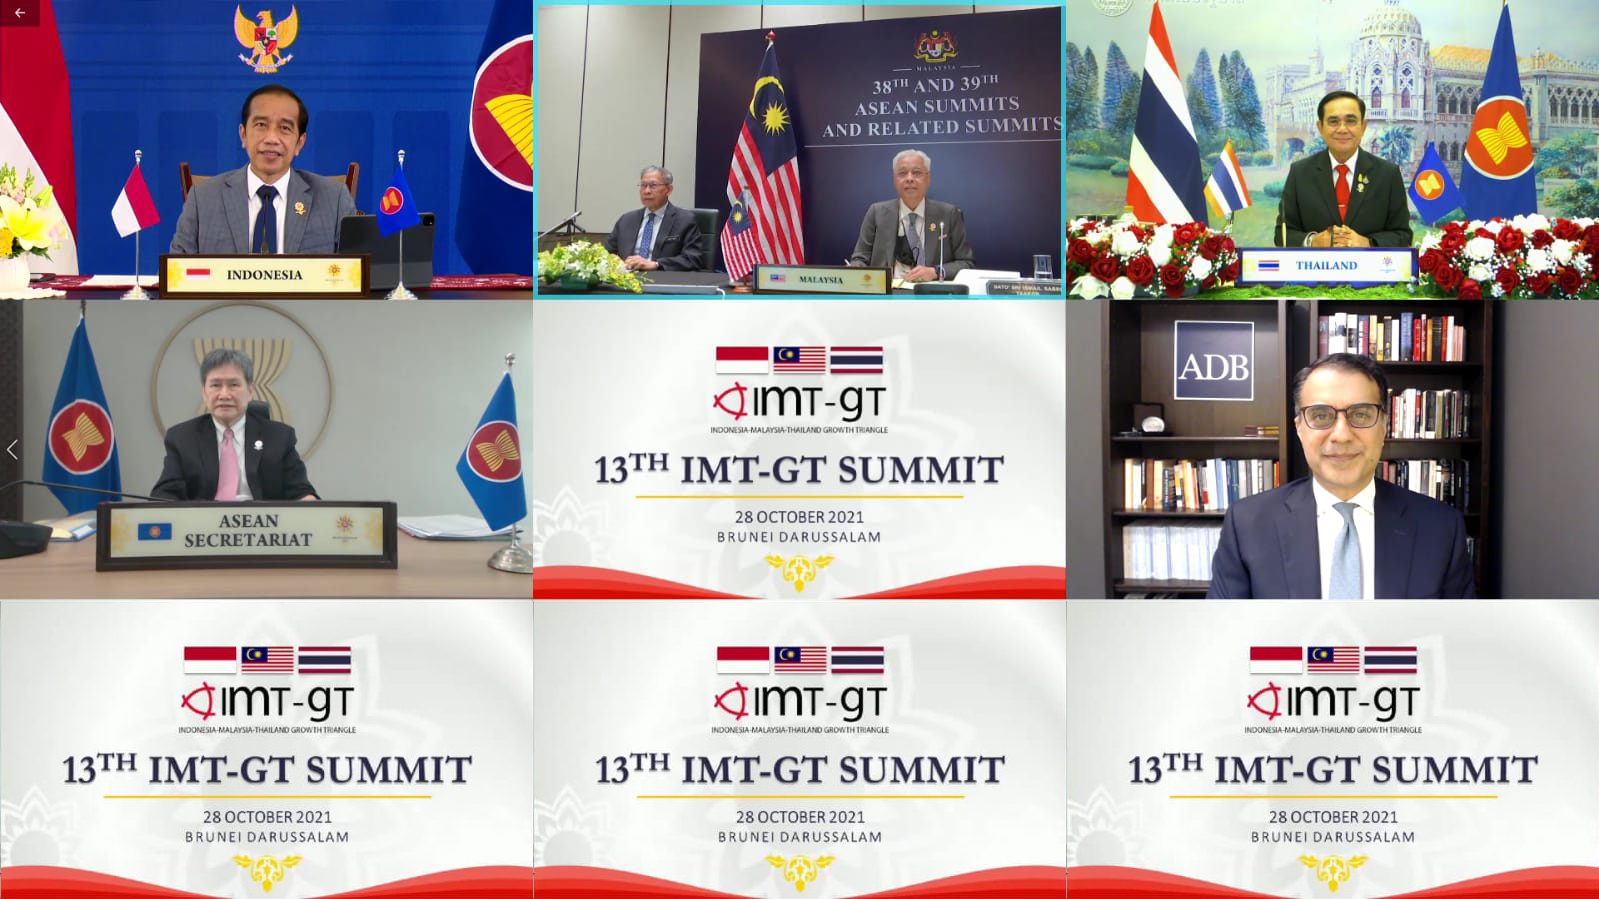 Indonesian President addressed 13th IMT-GT